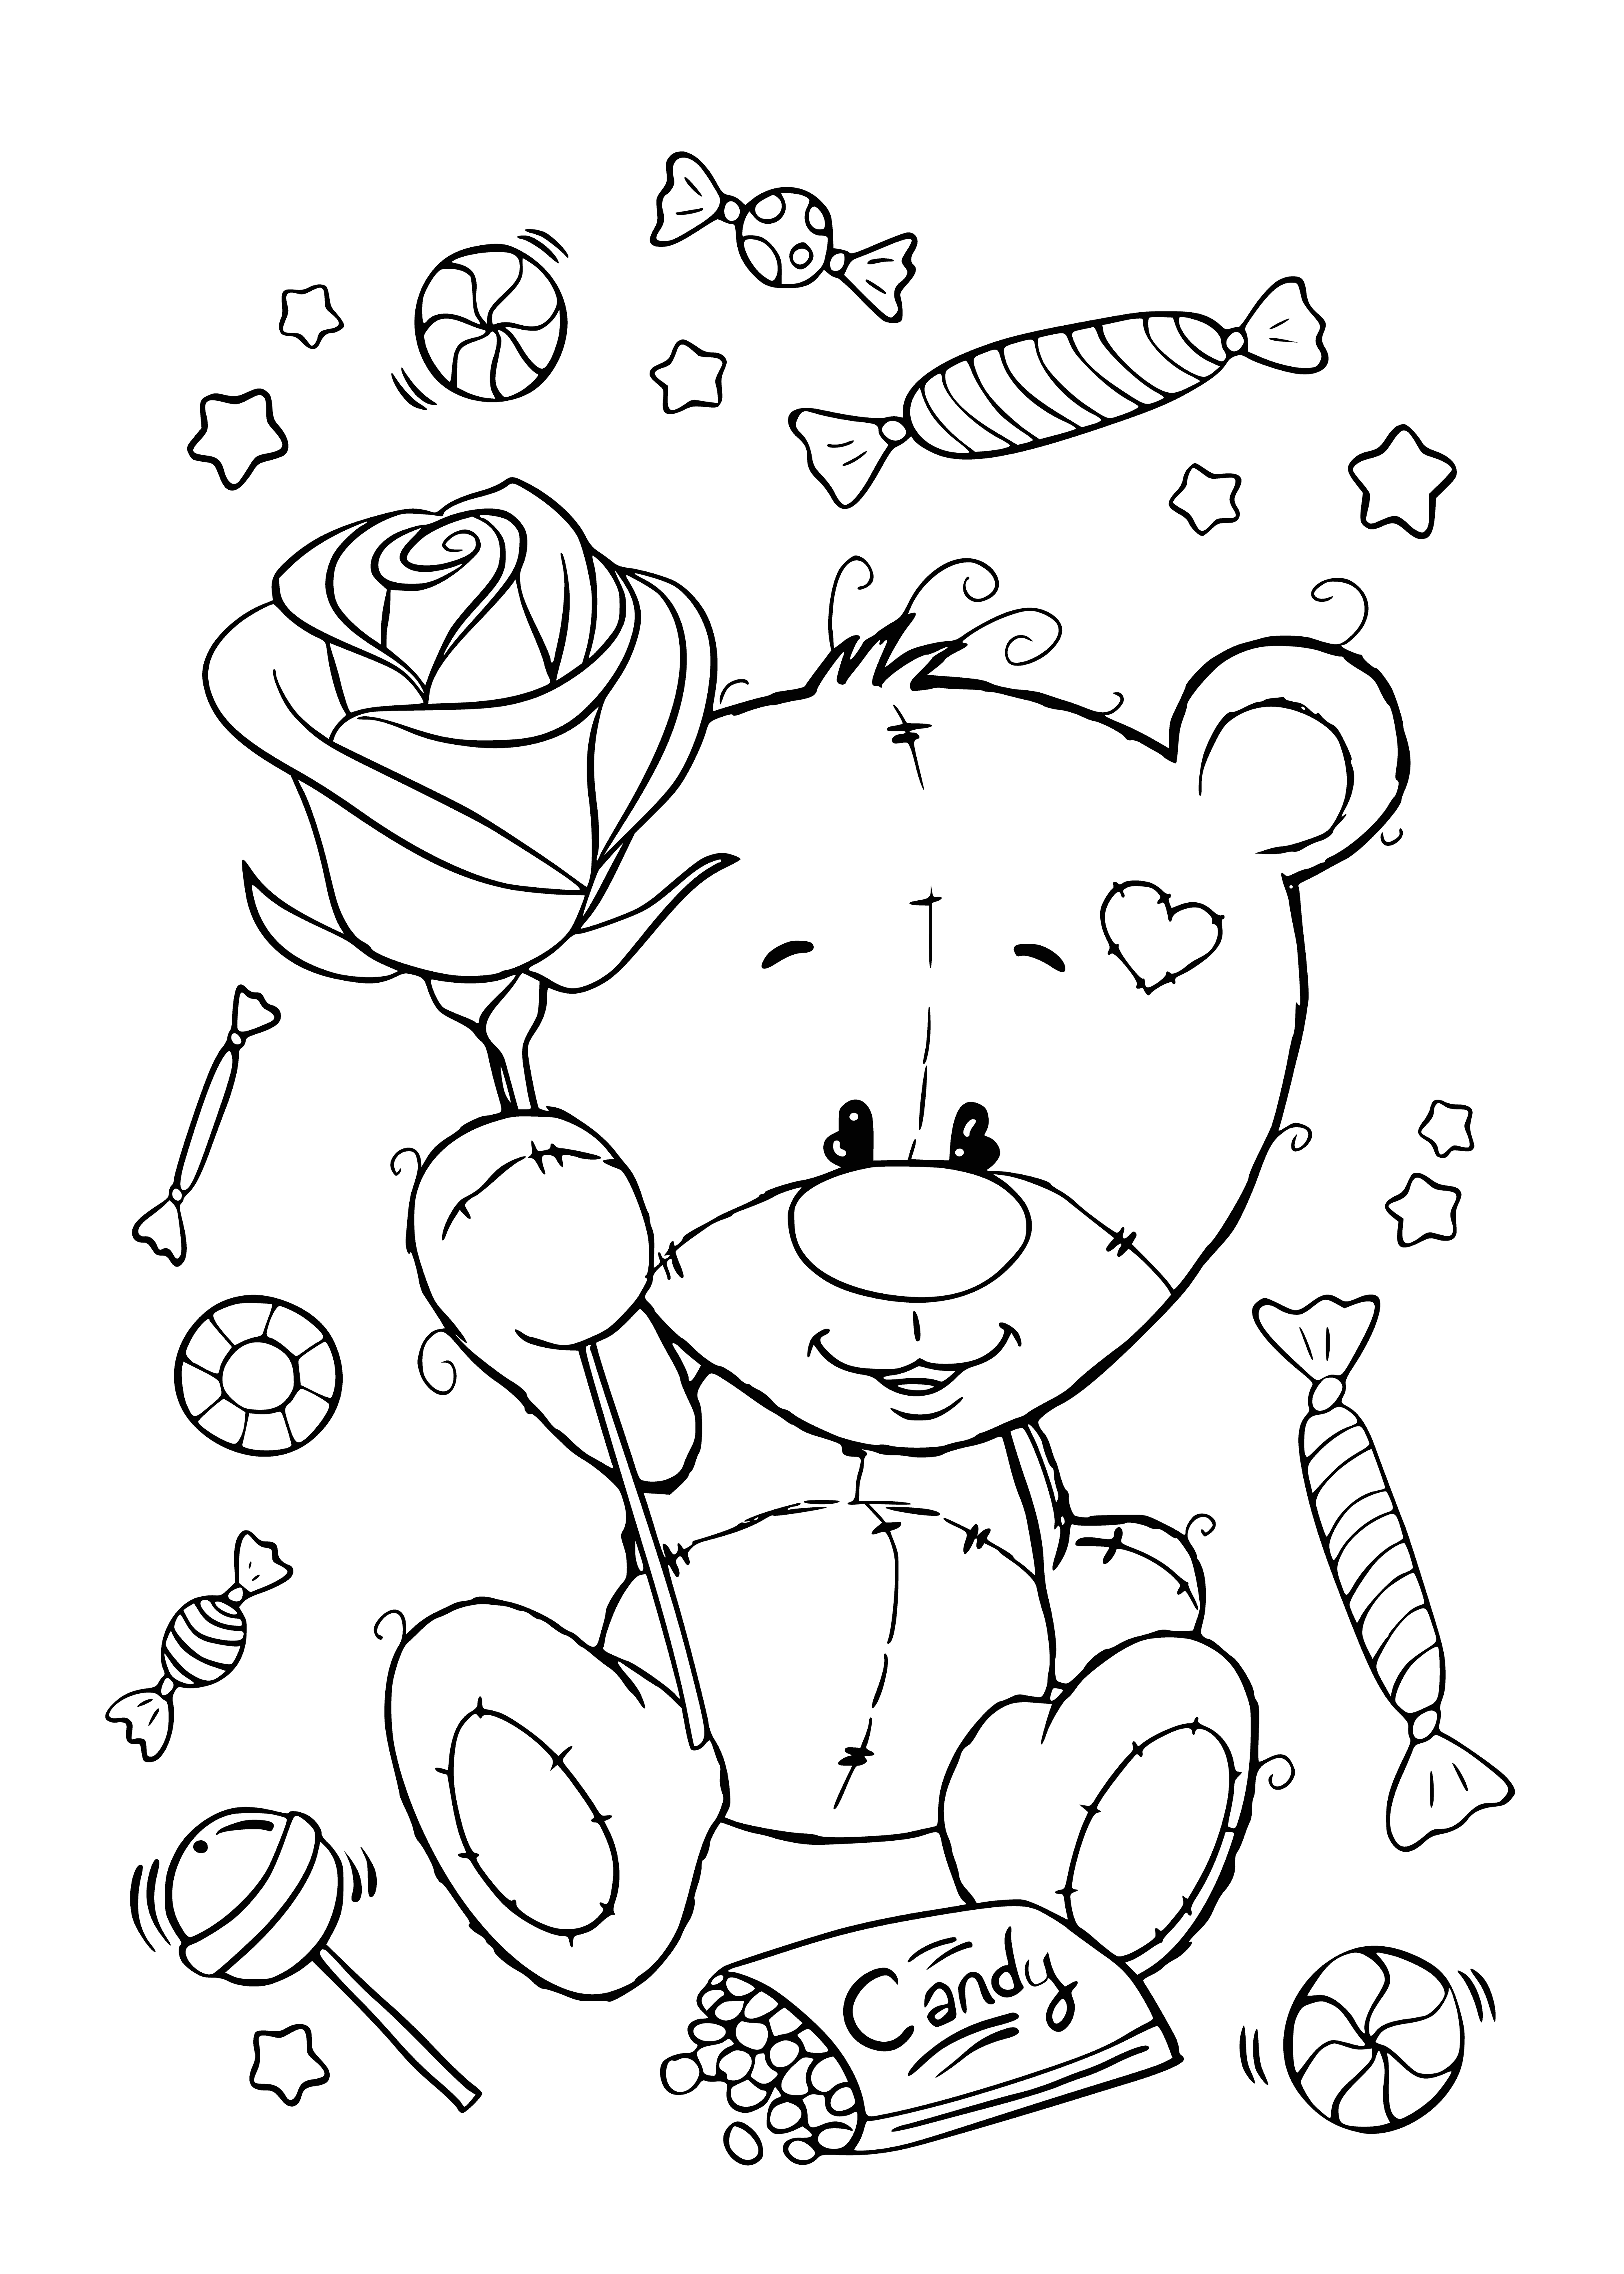 Teddy bear with a rose coloring page